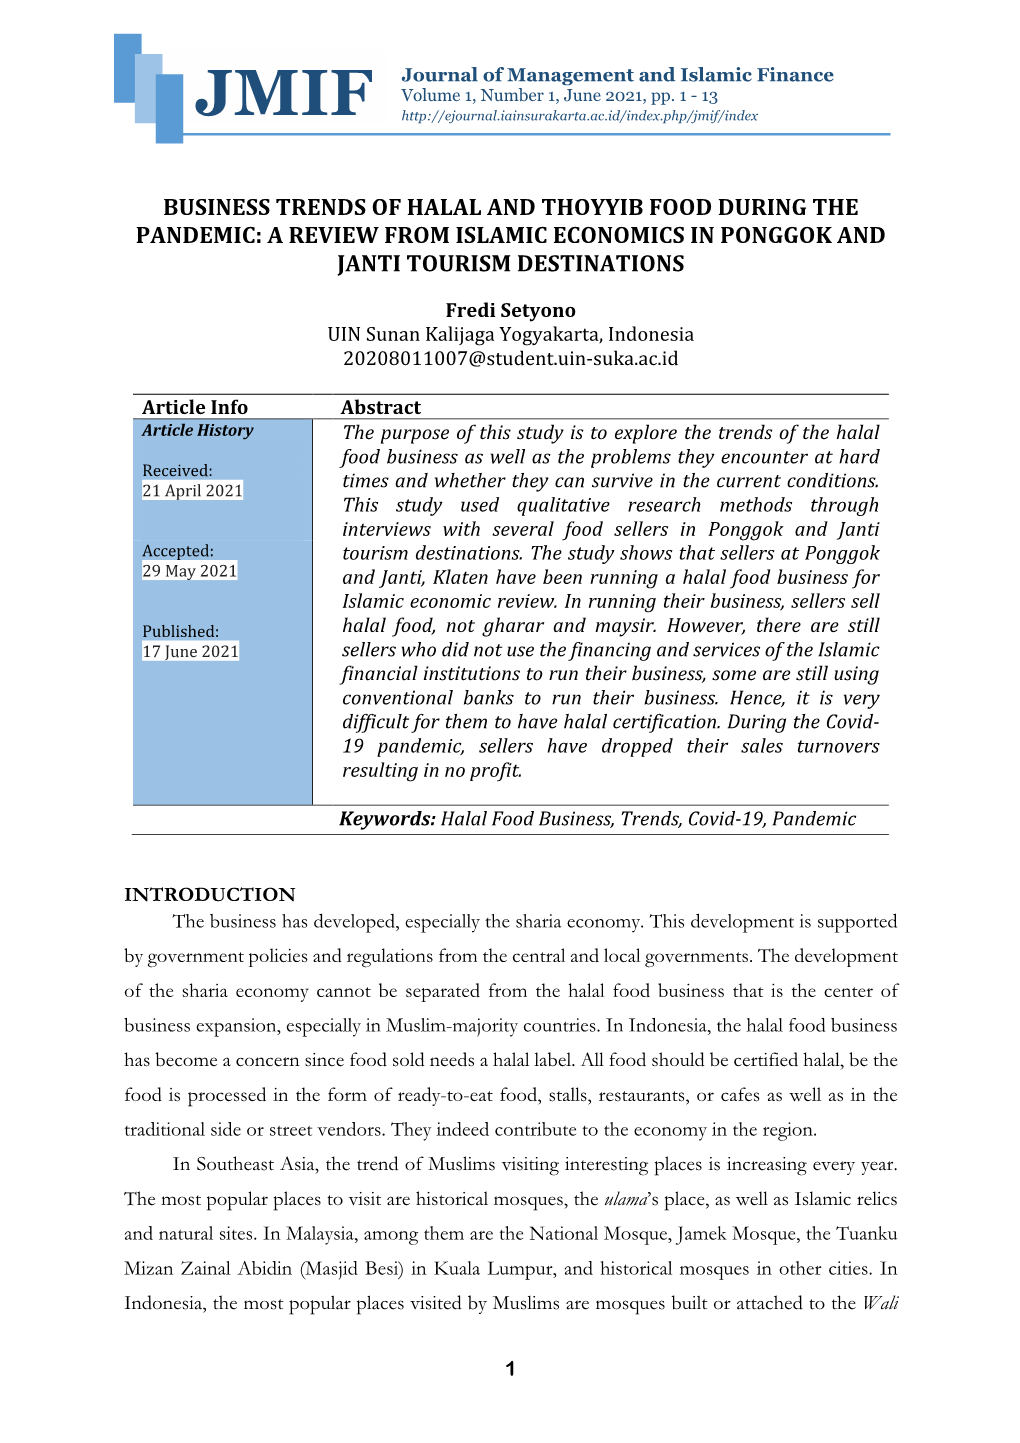 A Review from Islamic Economics in Ponggok and Janti Tourism Destinations